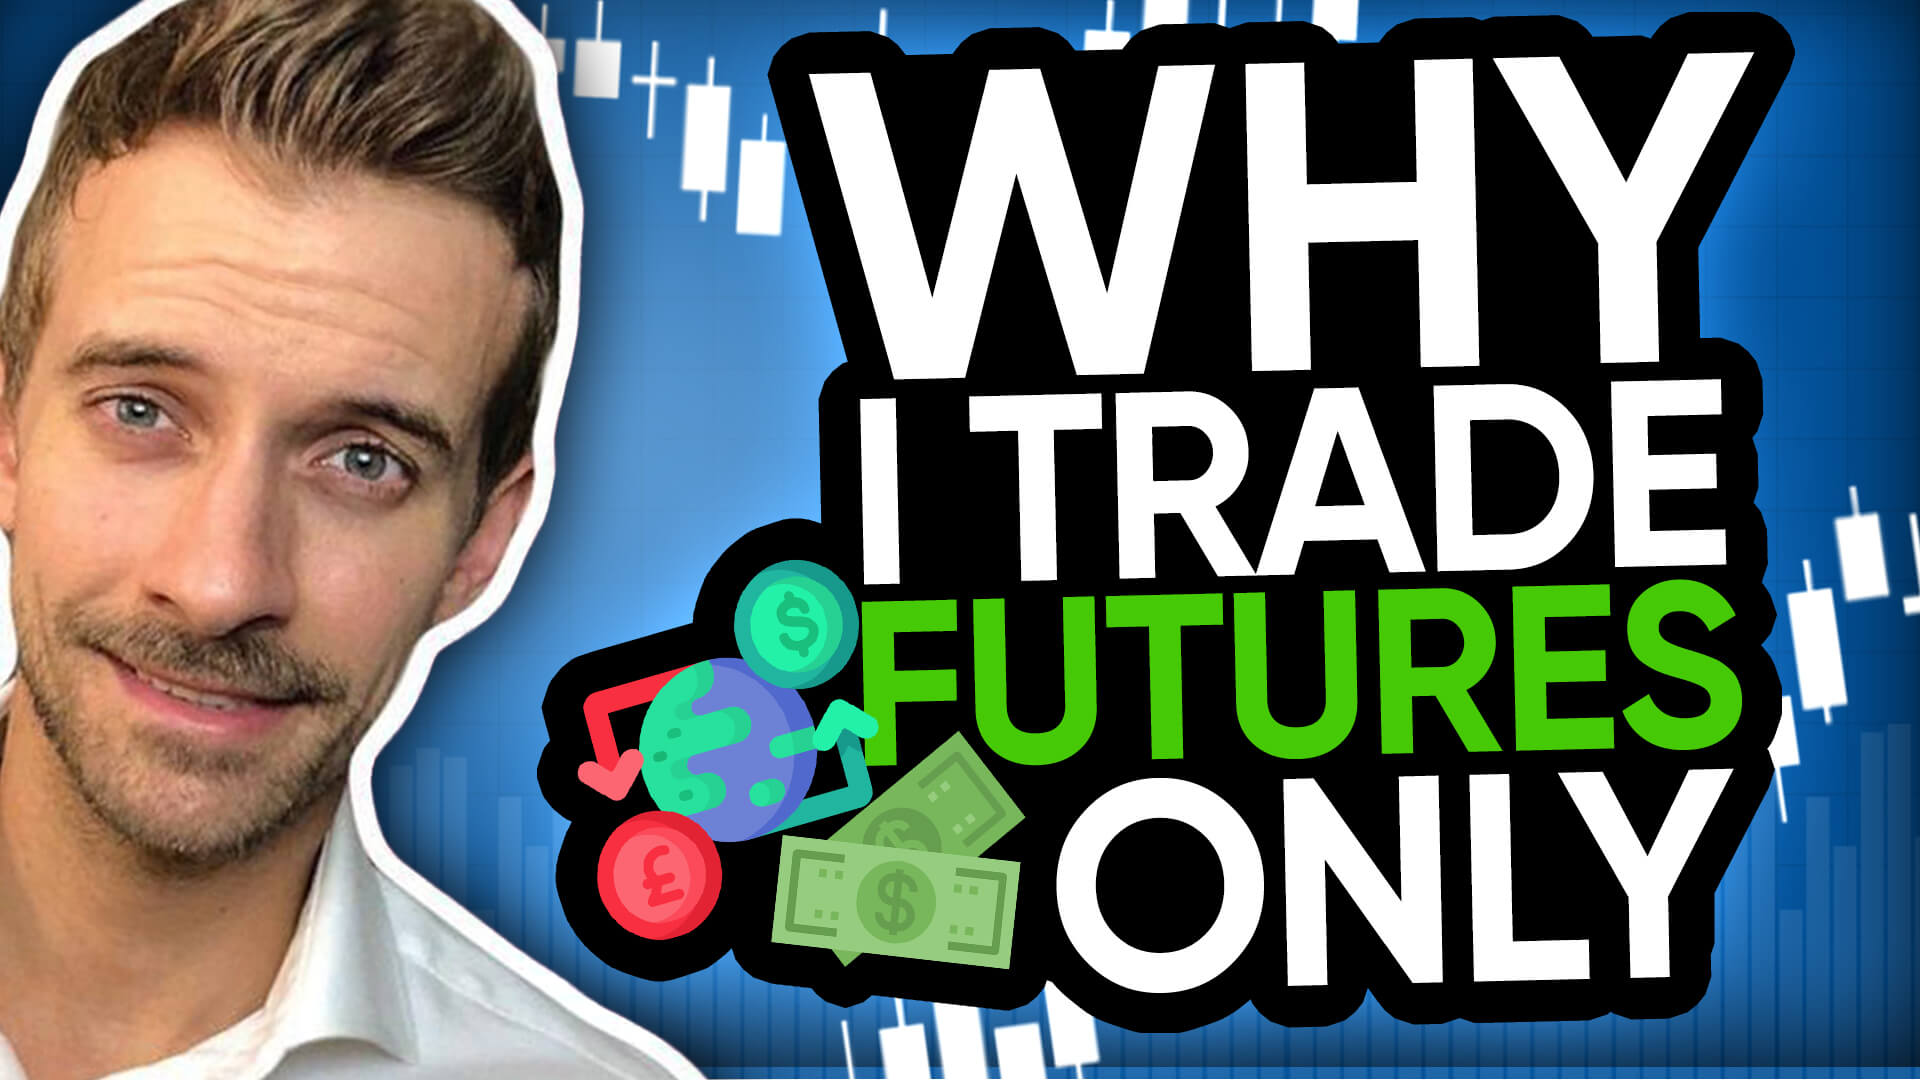 Why I Trade Futures Only